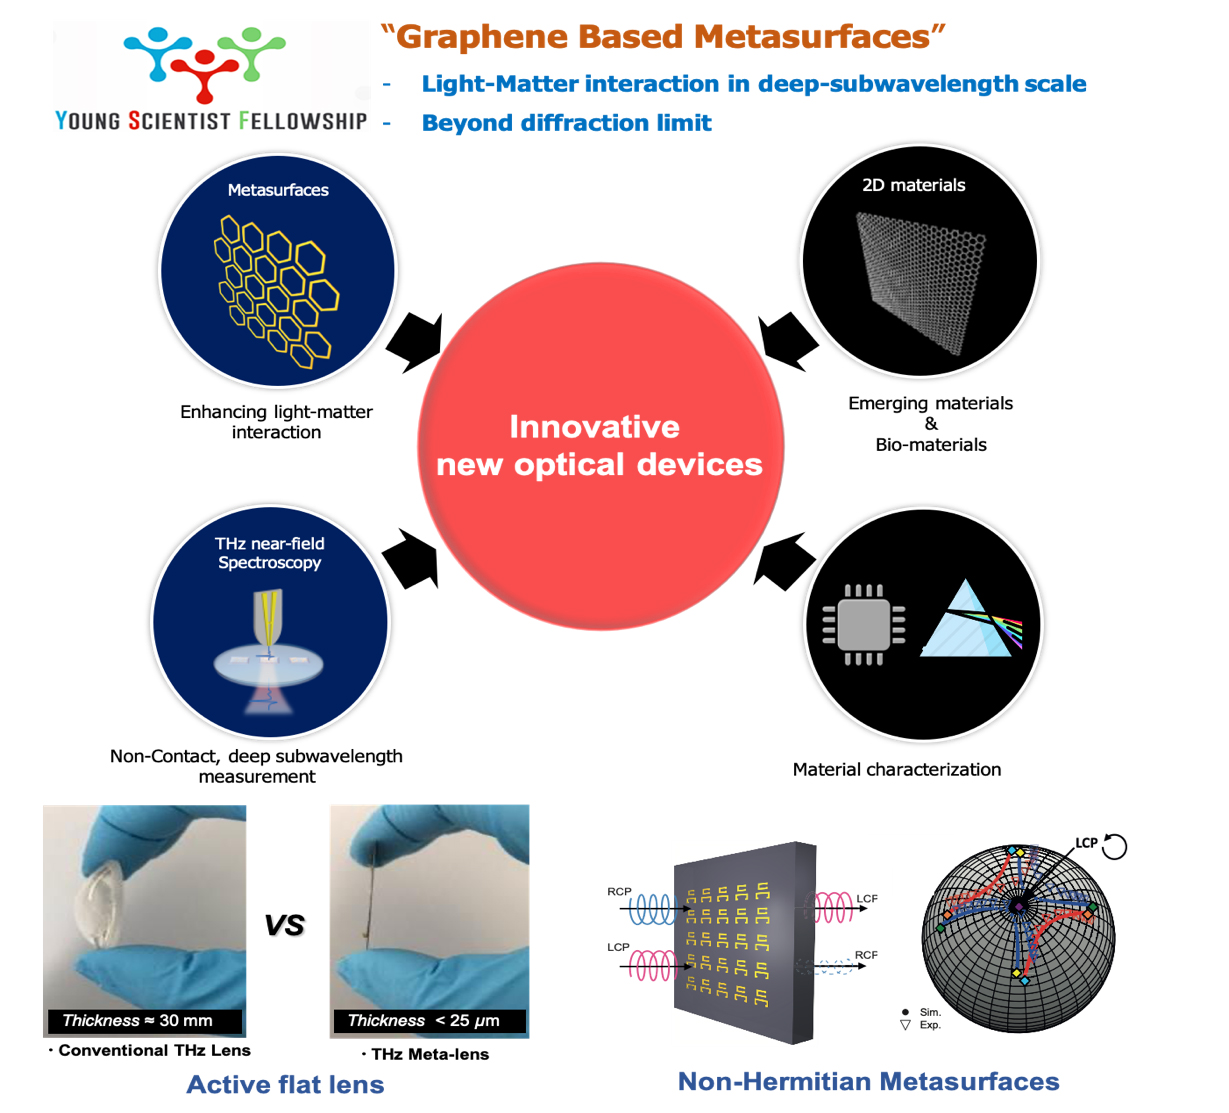 Research vision of YSF project Graphene based metasurfaces